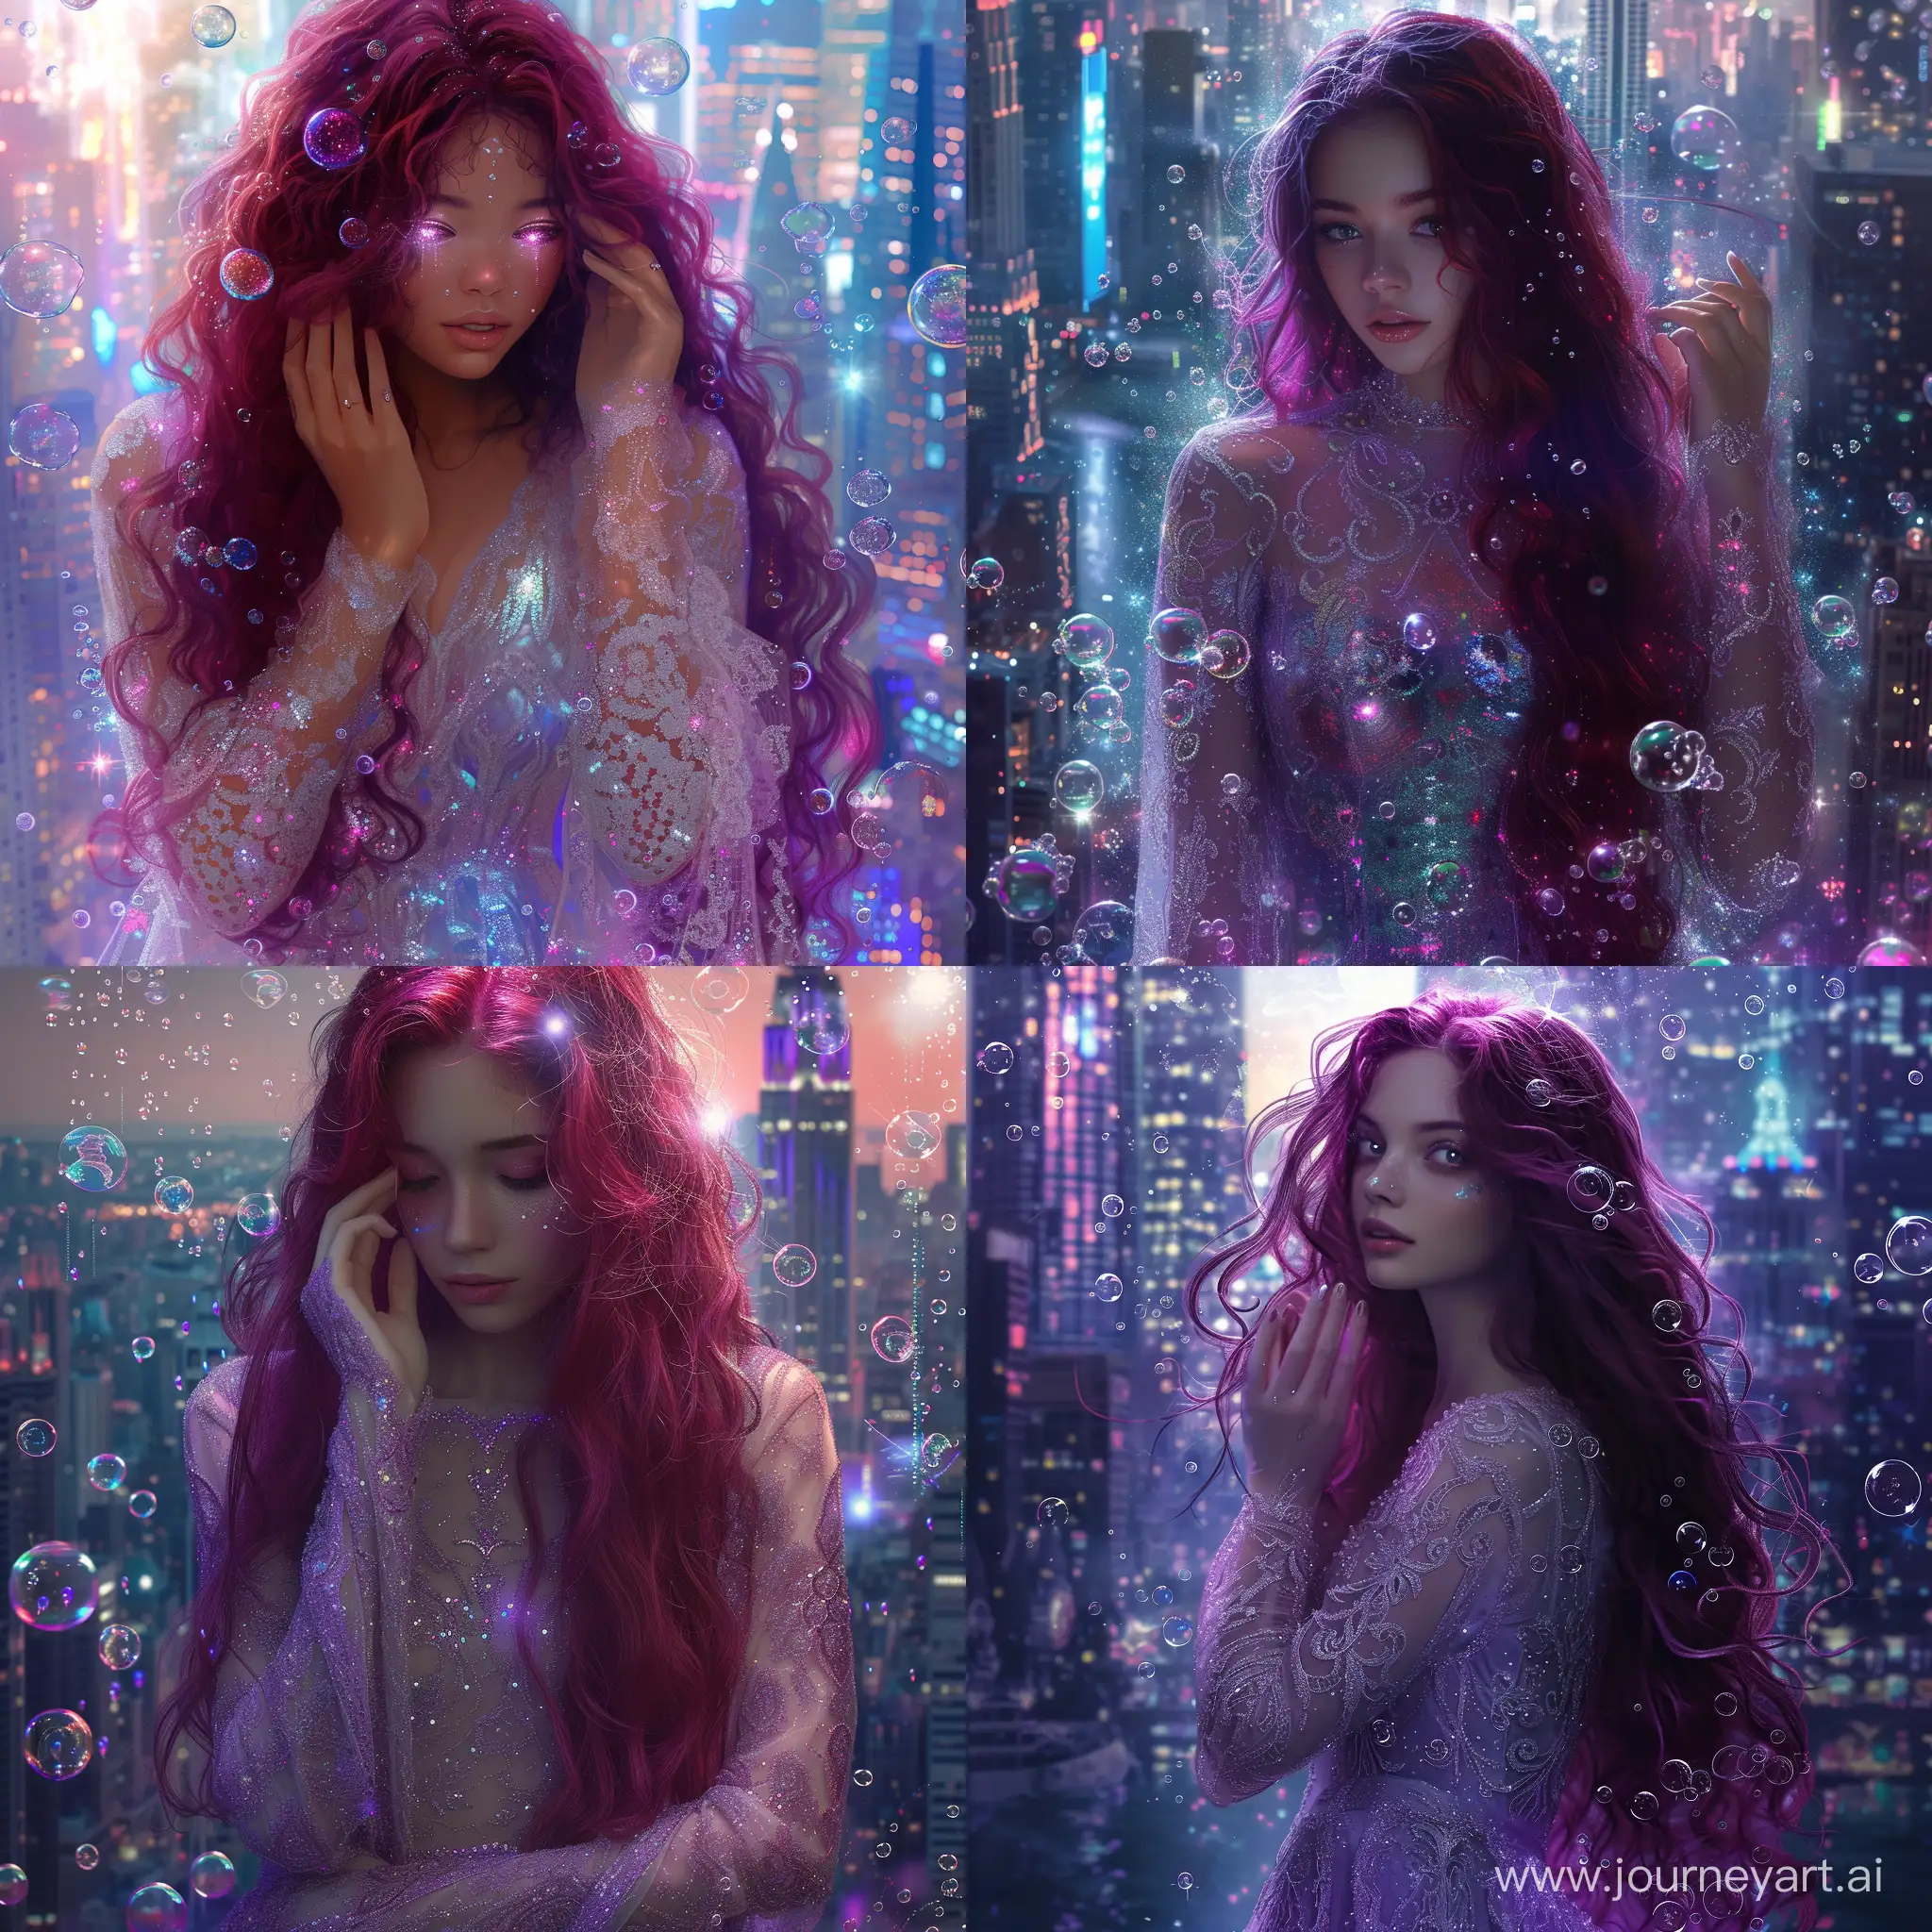 ((intricate city background, gem studded background)) ,1 girl, (ruby hair, inner curls:1.2),long hair, shining eyes, long iridescent dress, lace dress, 👗, ((face close-up)),scattered bubbles, iridescent, lighting, glitter, sparkle, gem background, top quality, 8k,precise background,,stylish,shimmering effects--no missing fingers,bad hands,bad anatomybad anatomy